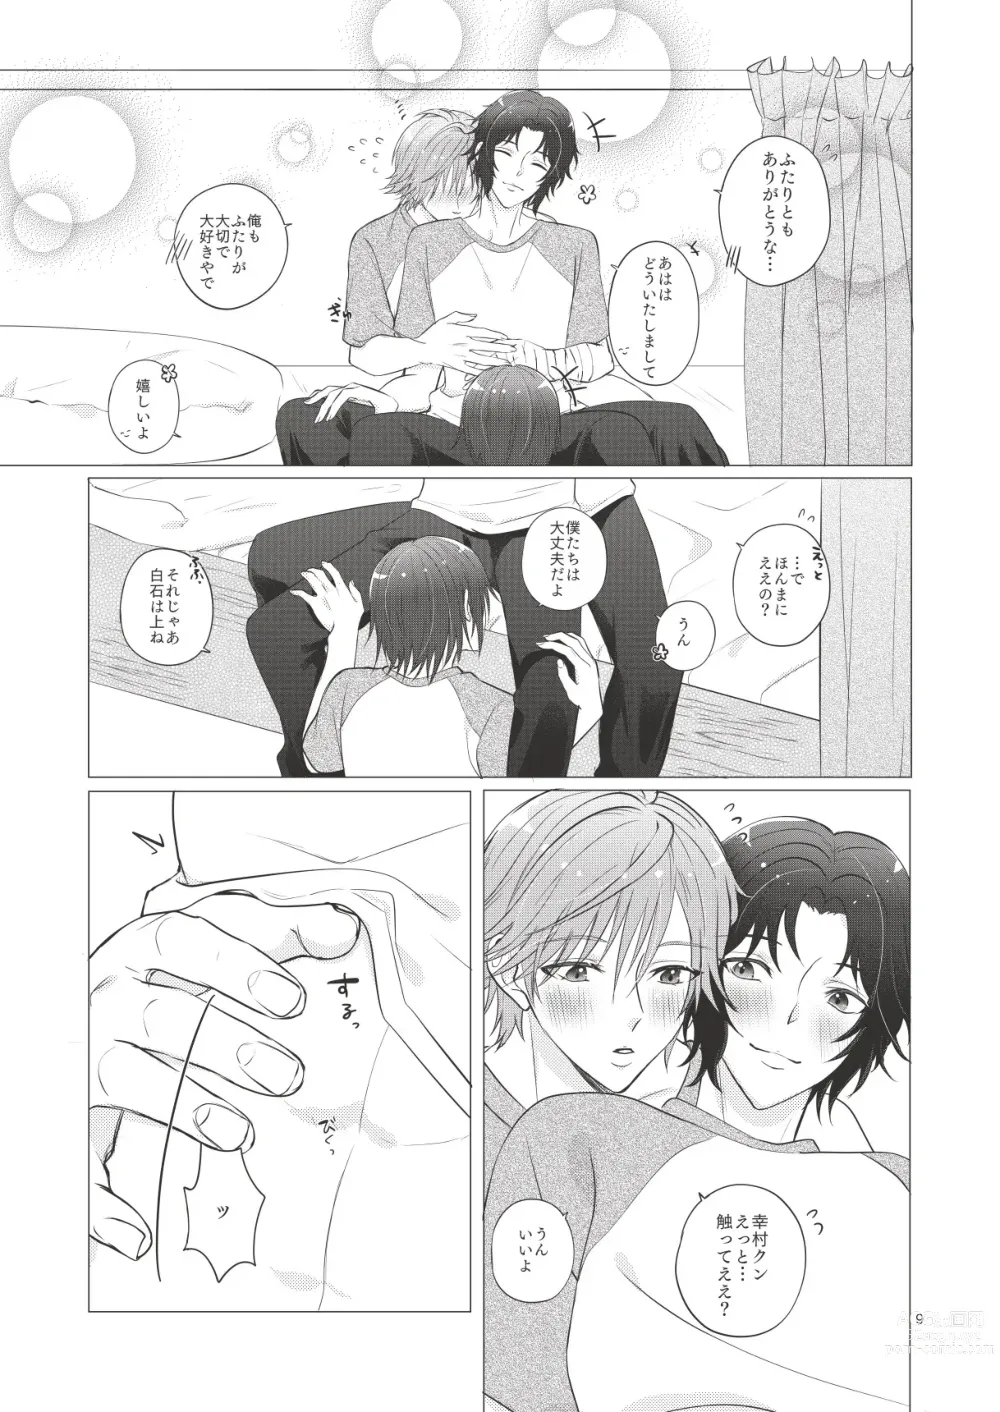 Page 8 of doujinshi Bonds of affection